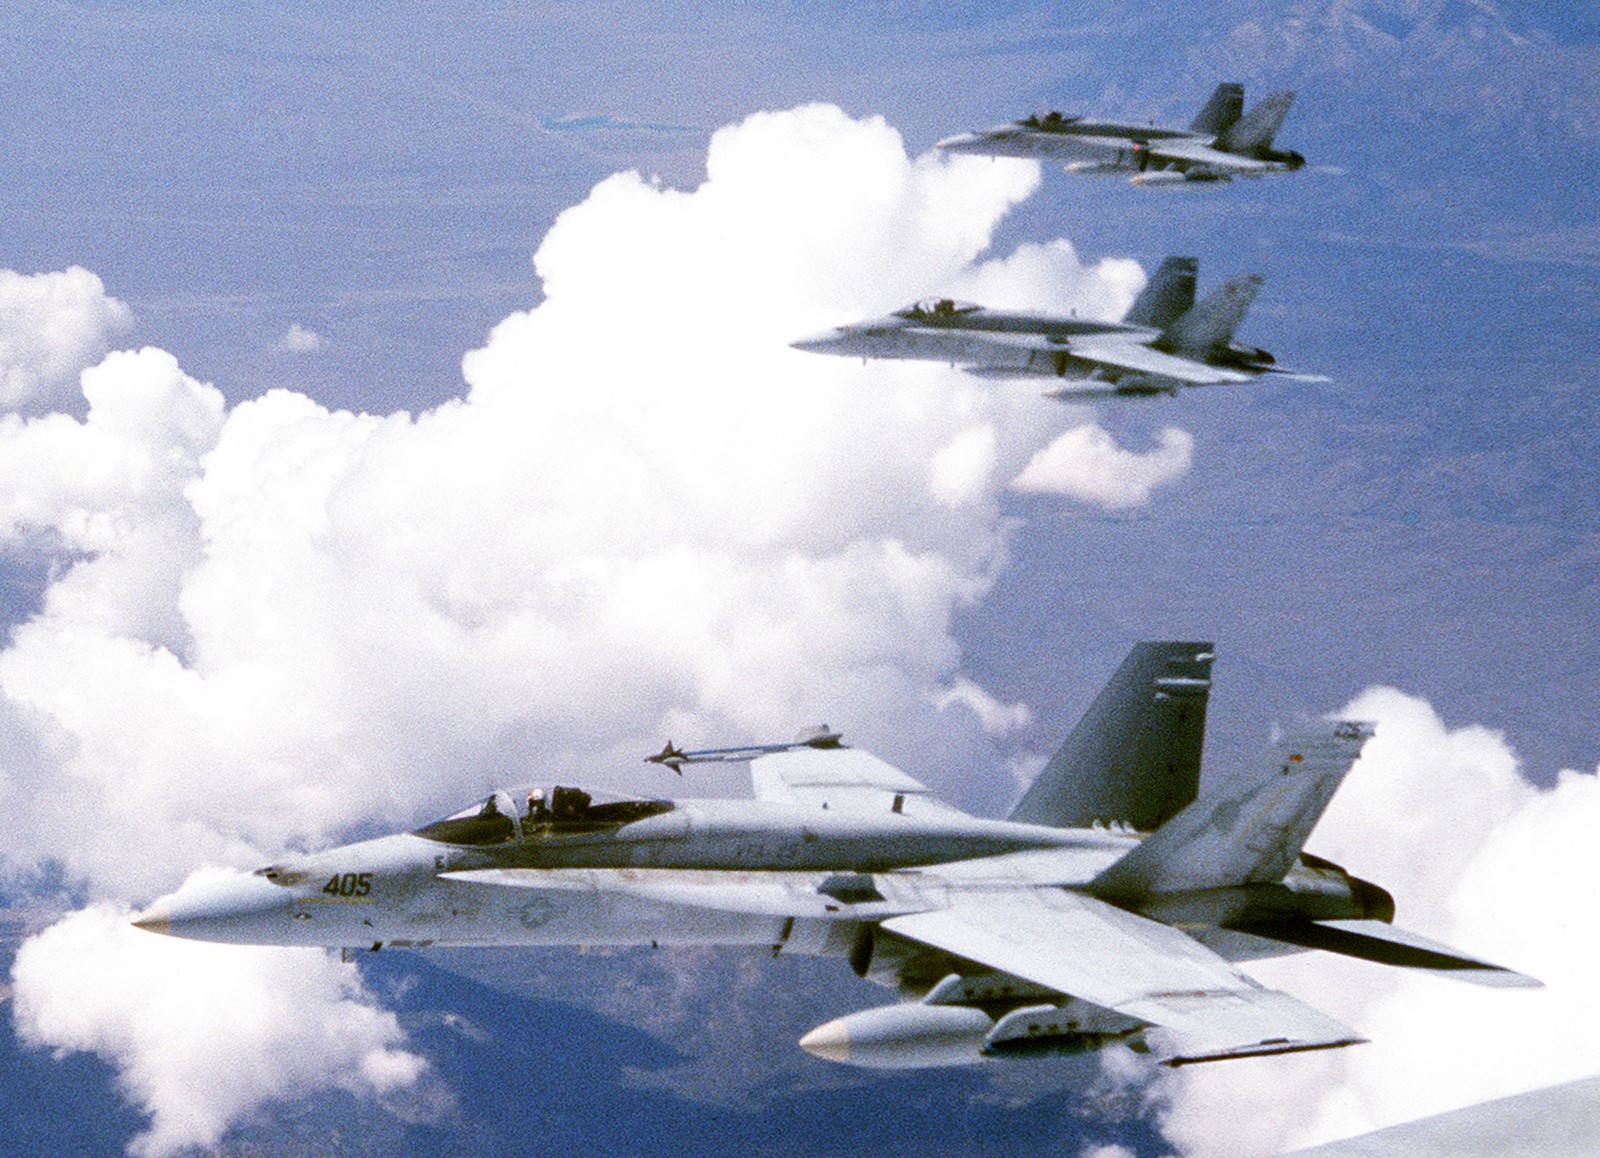 vfa-25 fist of the fleet strike fighter squadron f/a-18a hornet gallant eagle 1988 84p